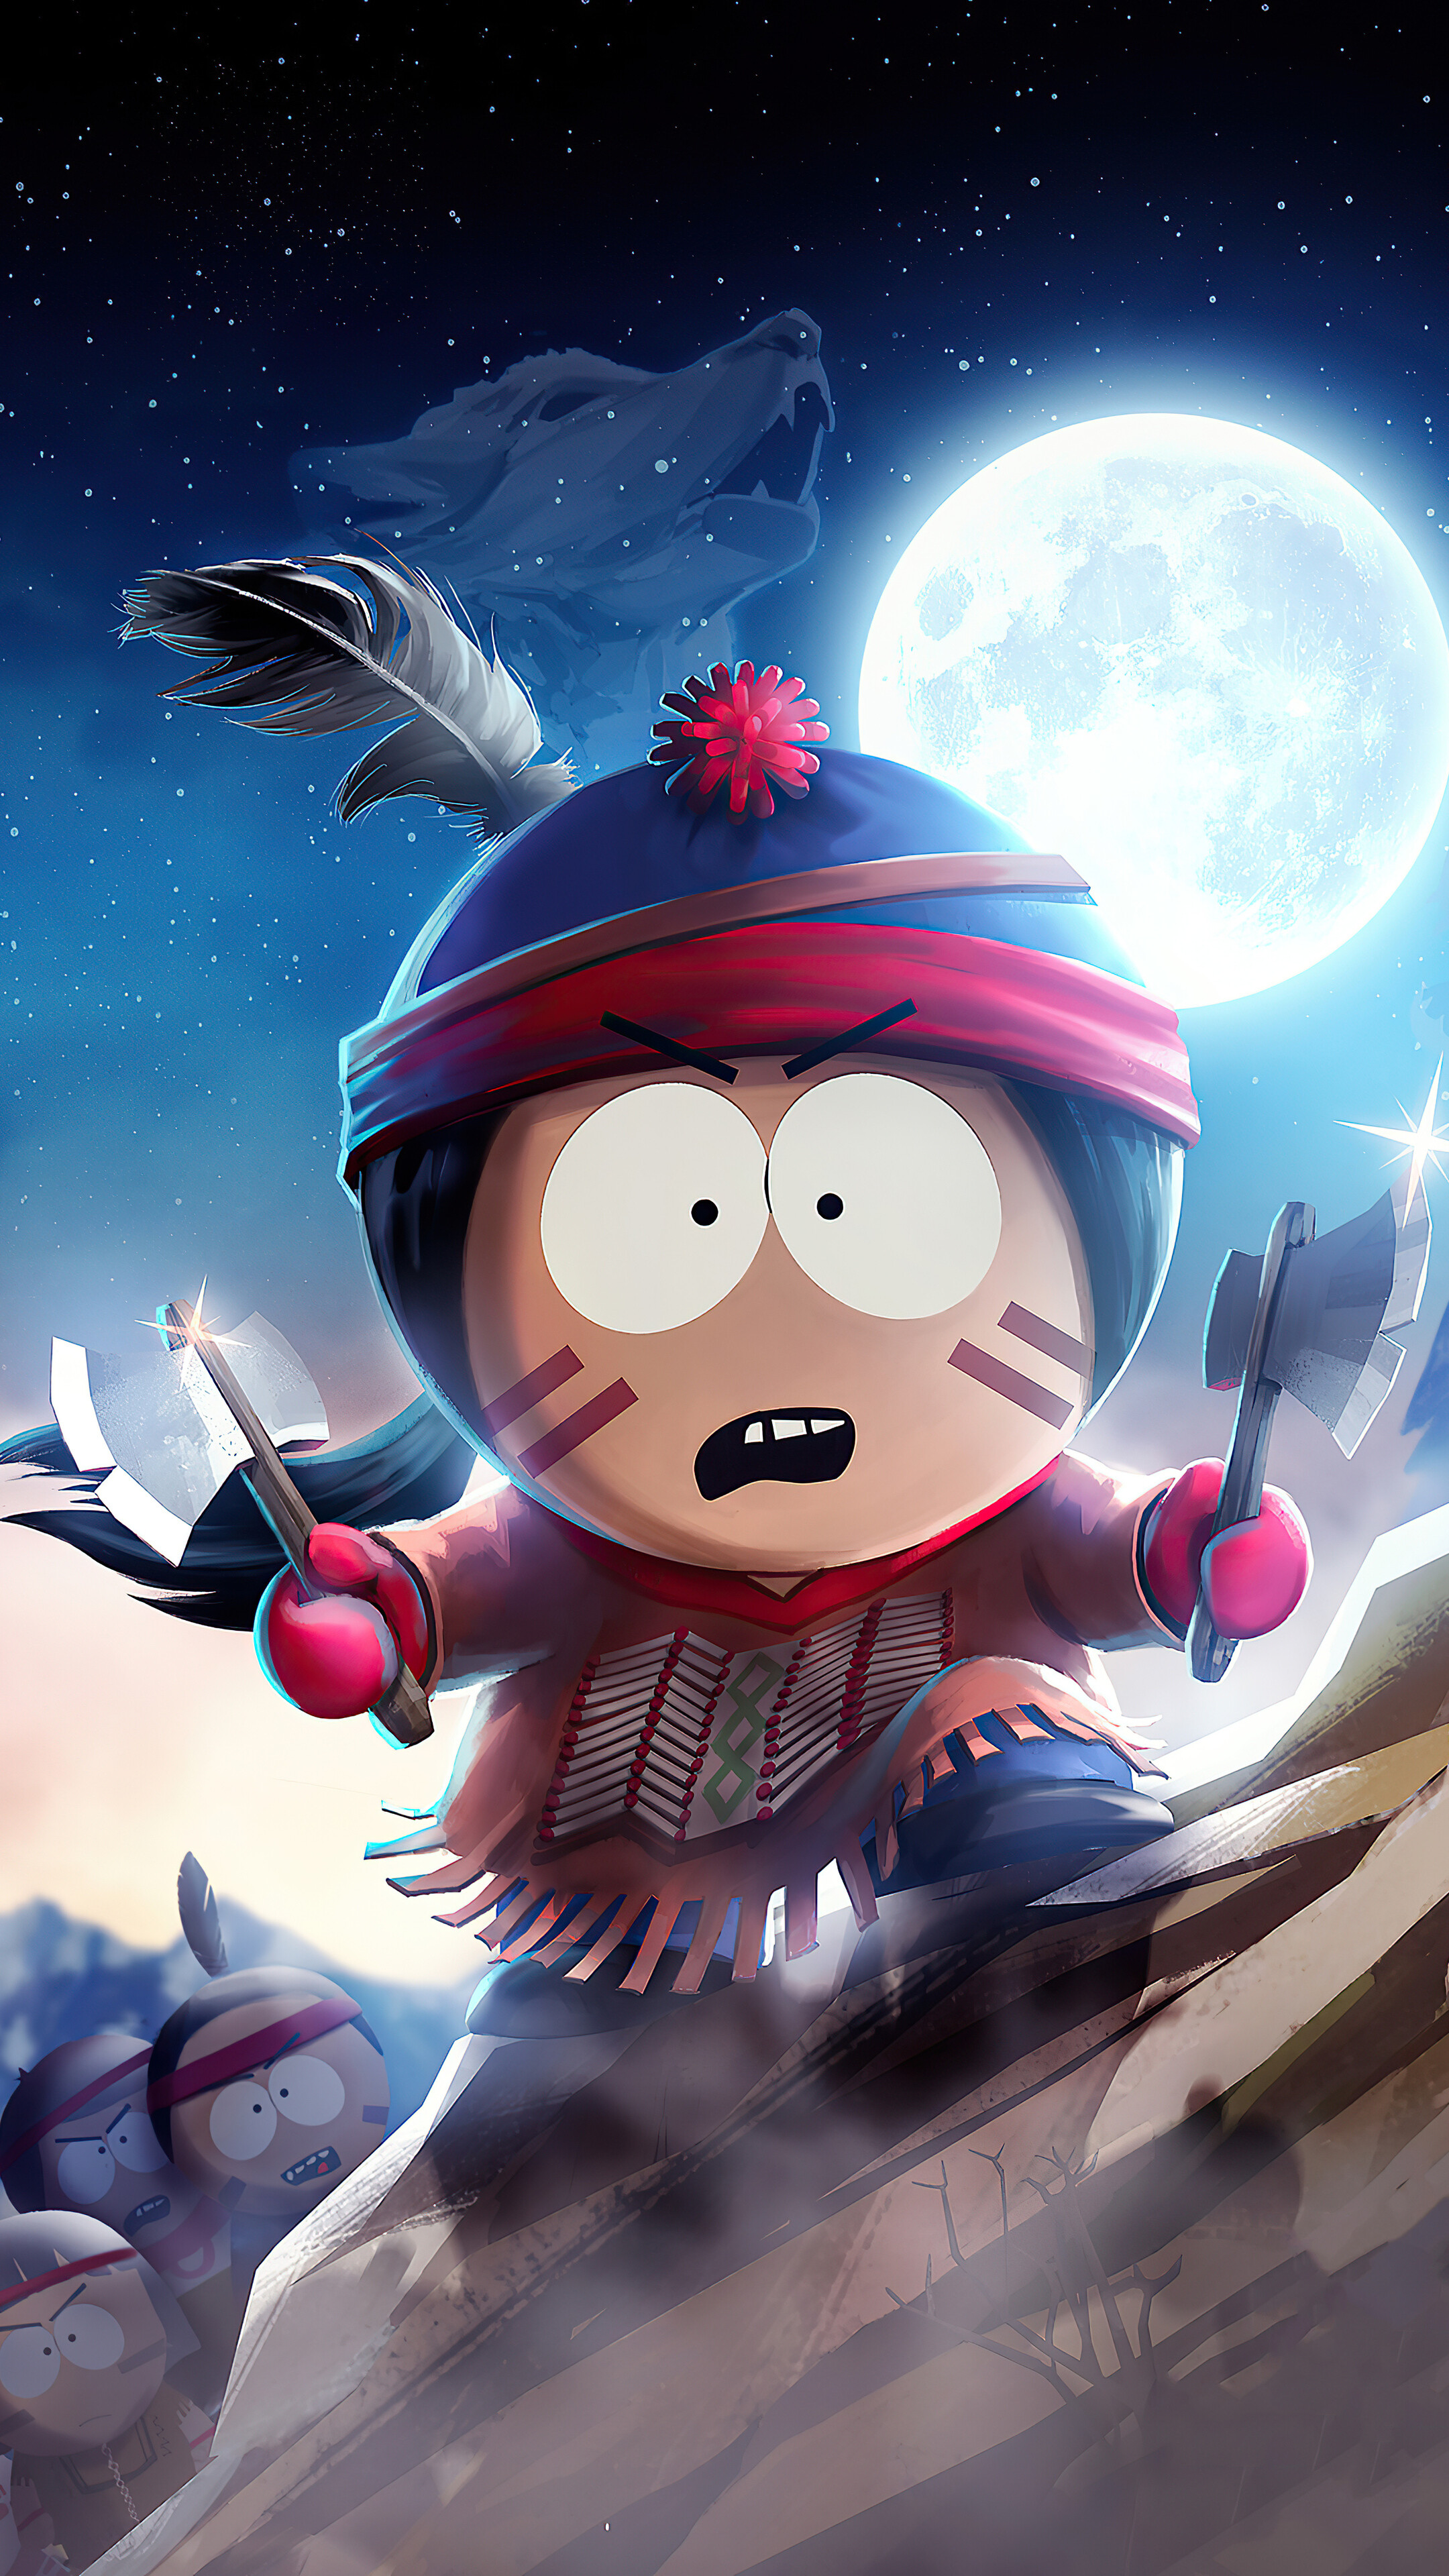 South Park: Phone Destroyer, Stan Marsh, Collectible card game. 2160x3840 4K Wallpaper.